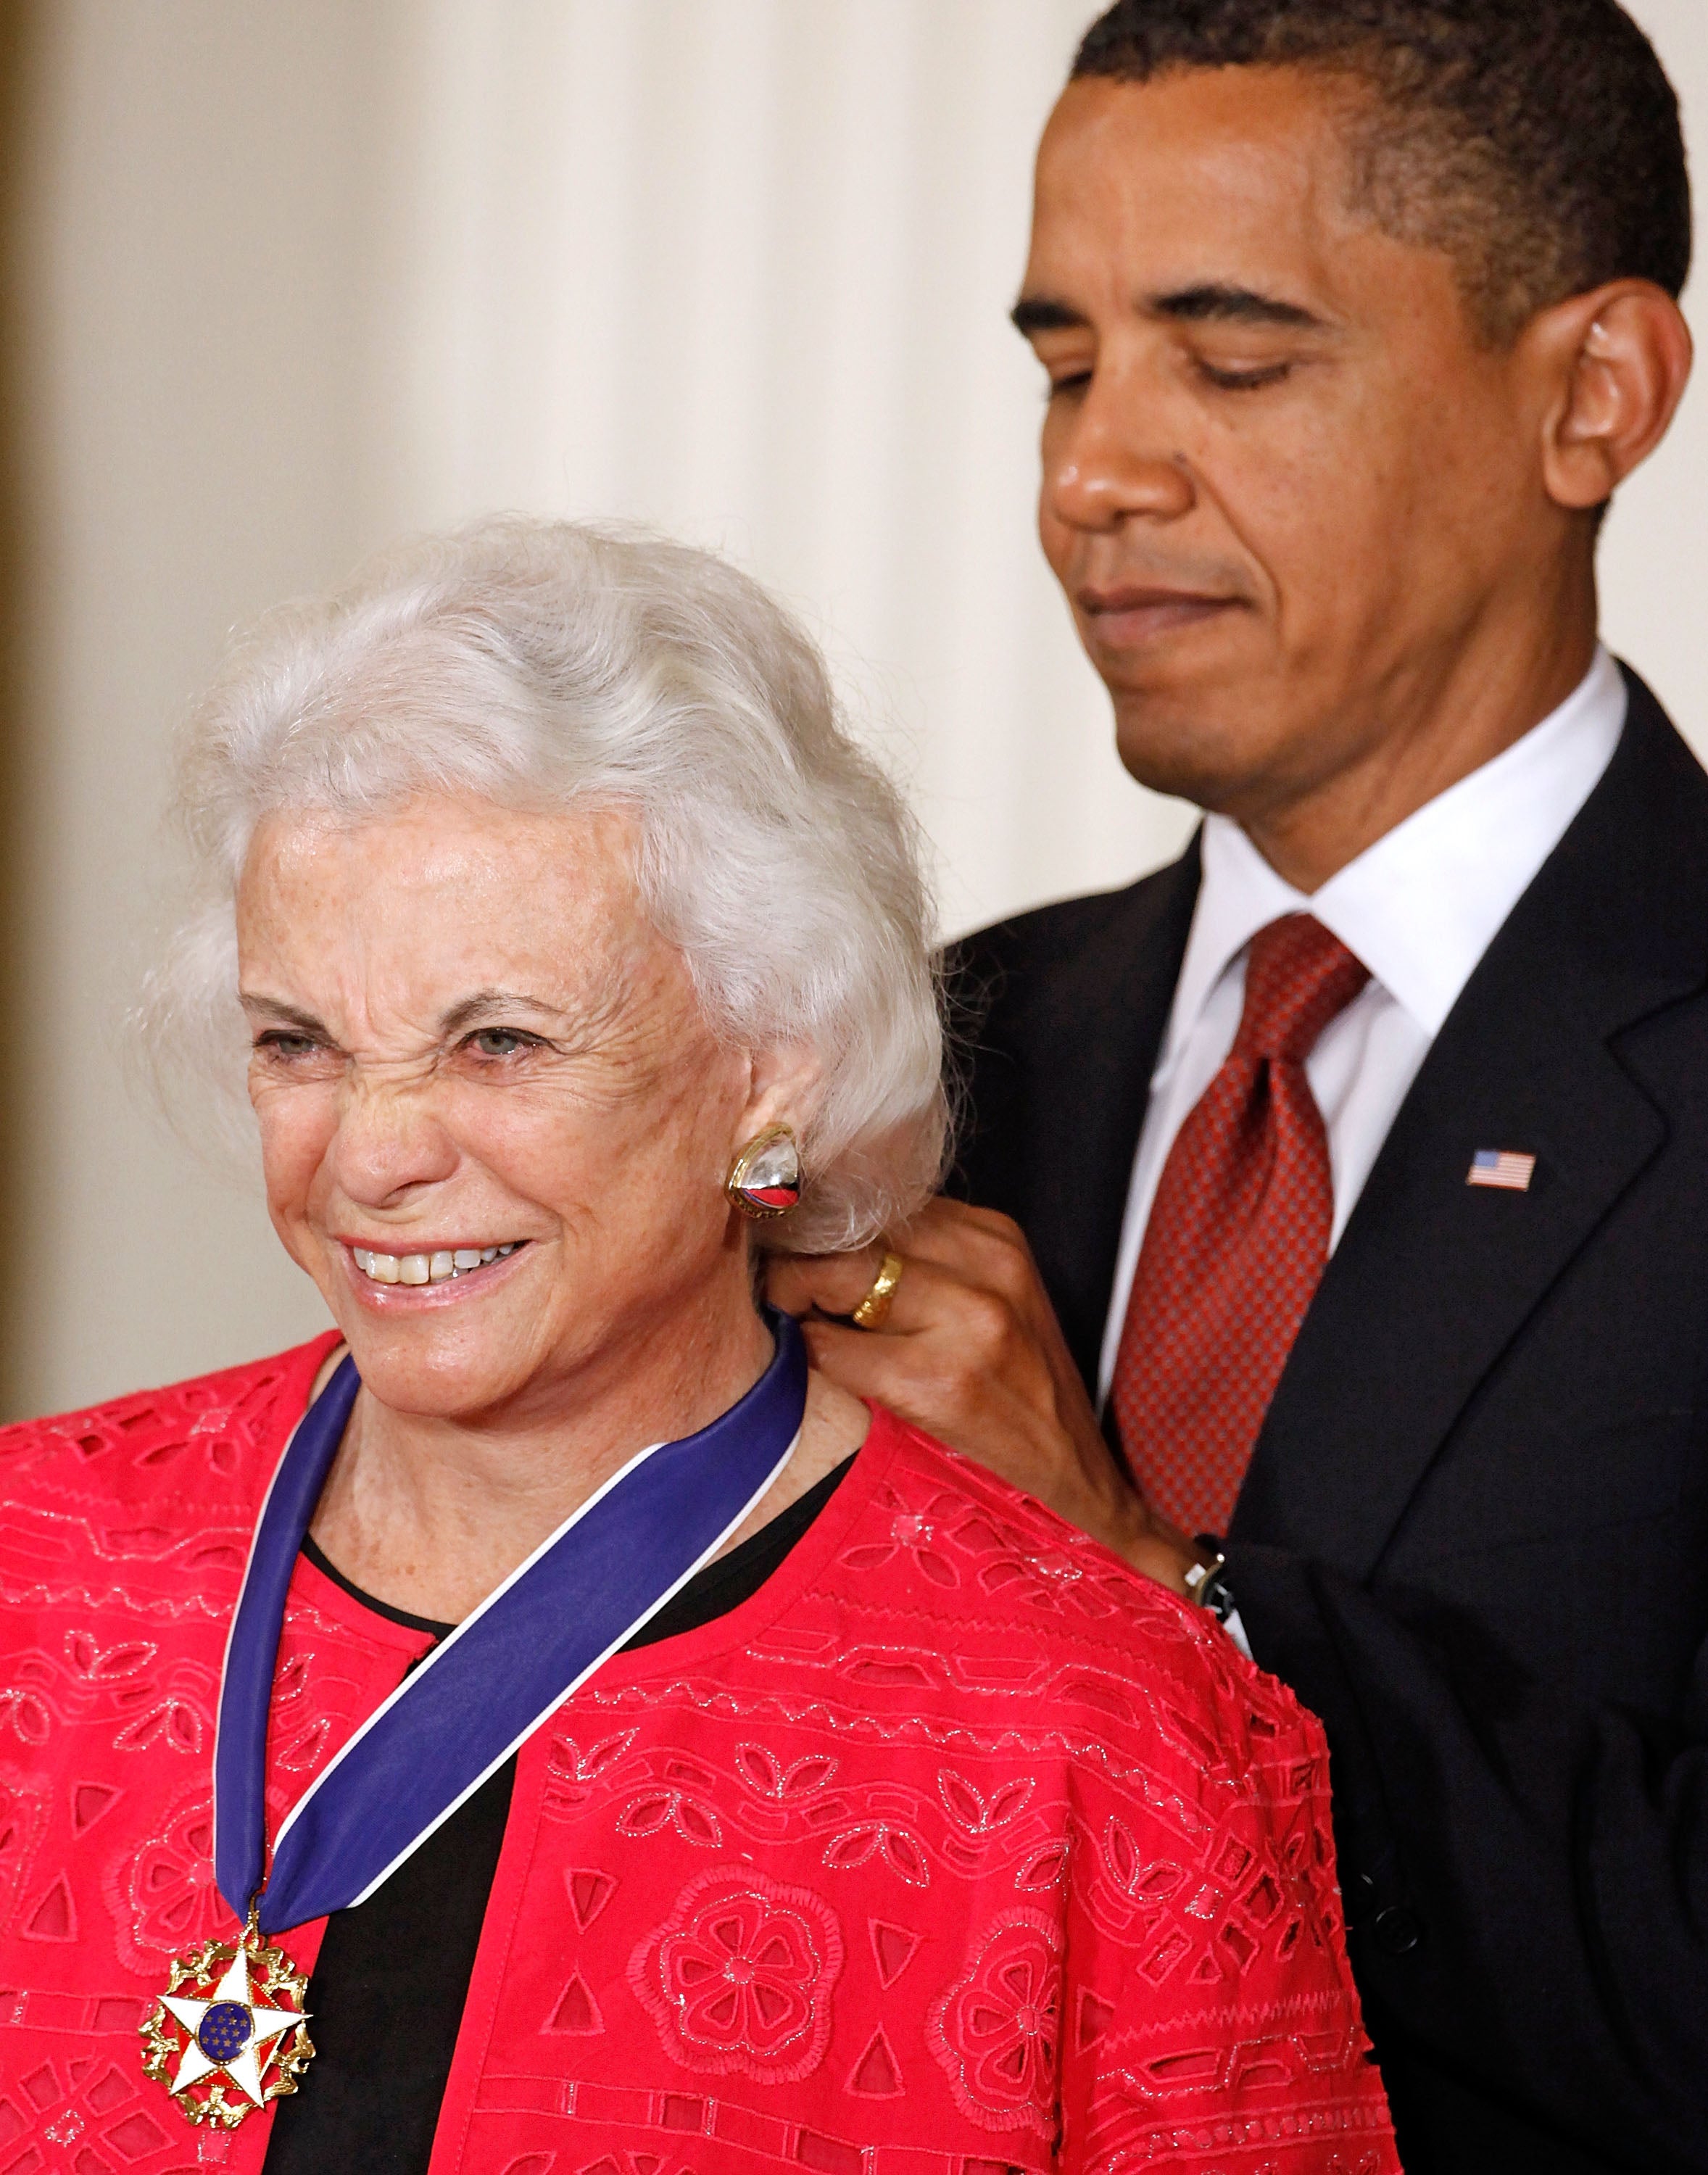 President Barack Obama presents the Medal of Freedom to O'Connor during a ceremony in the East Room of the White House in August 2009